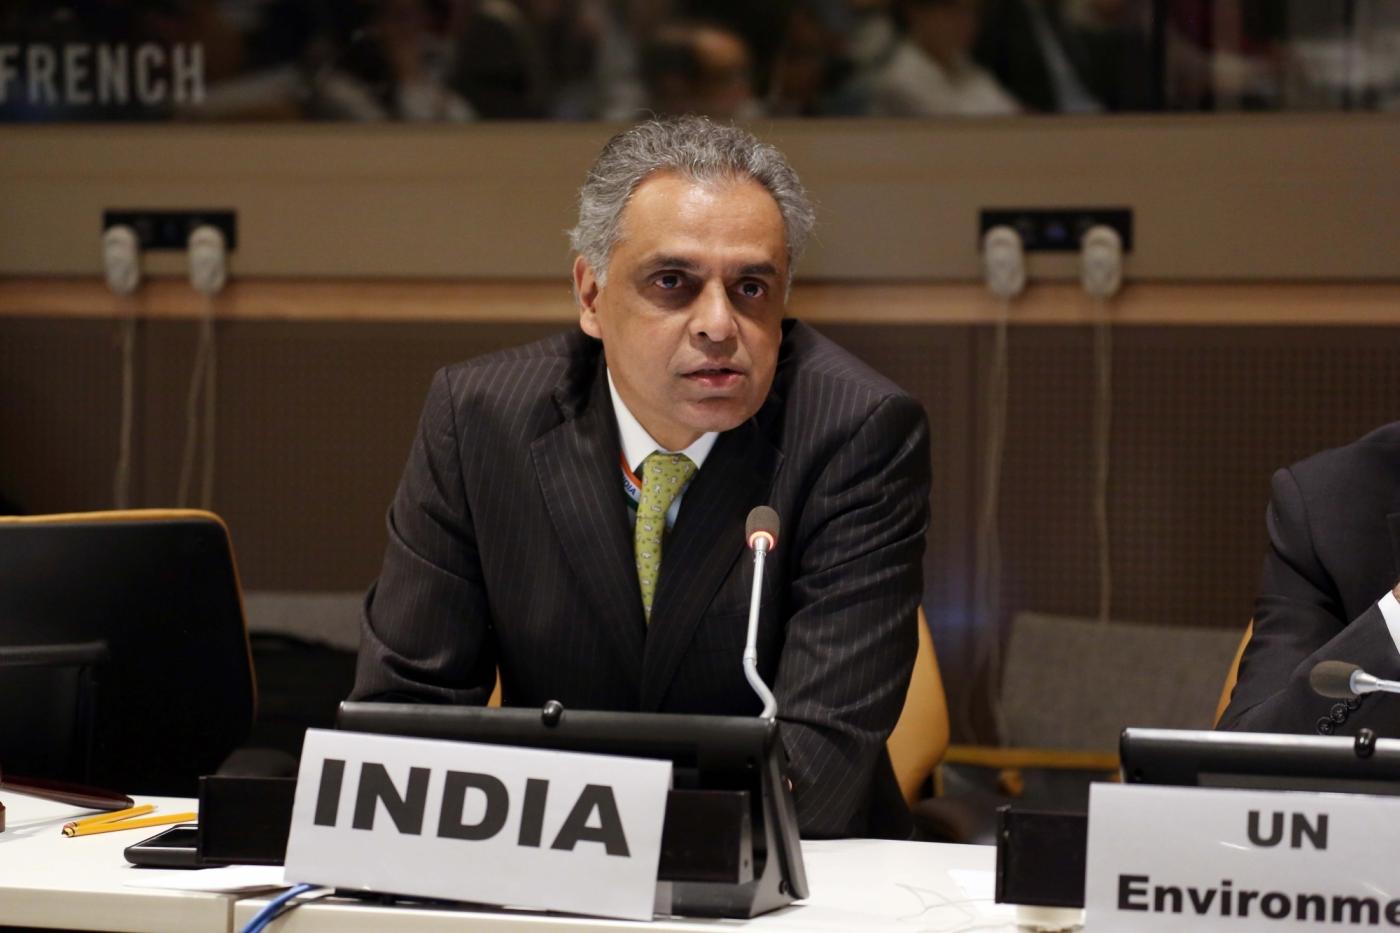 New York: United Nations (UN) Ambassador Syed Akbaruddin addresses at UN Conference on Environment, in New York on June 5, 2018. (Photo: Mohammed Jaffer/IANS) by .